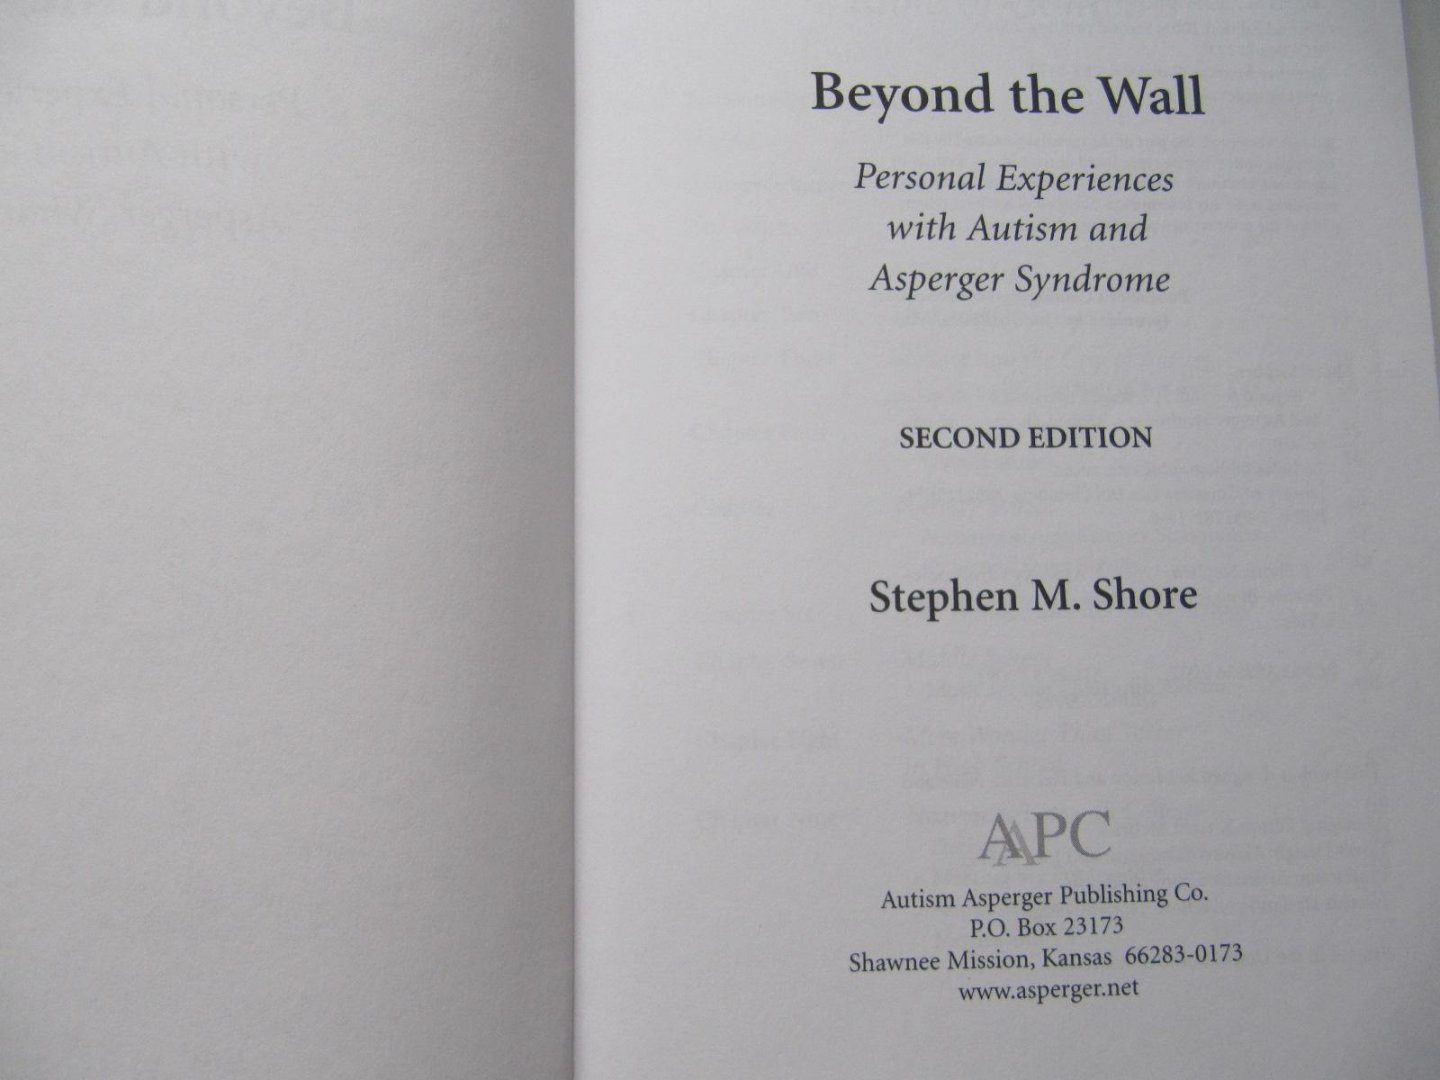 Shore, Stephen M. - Beyond the Wall / Personal Experiences with Autism and Asperger Syndrome